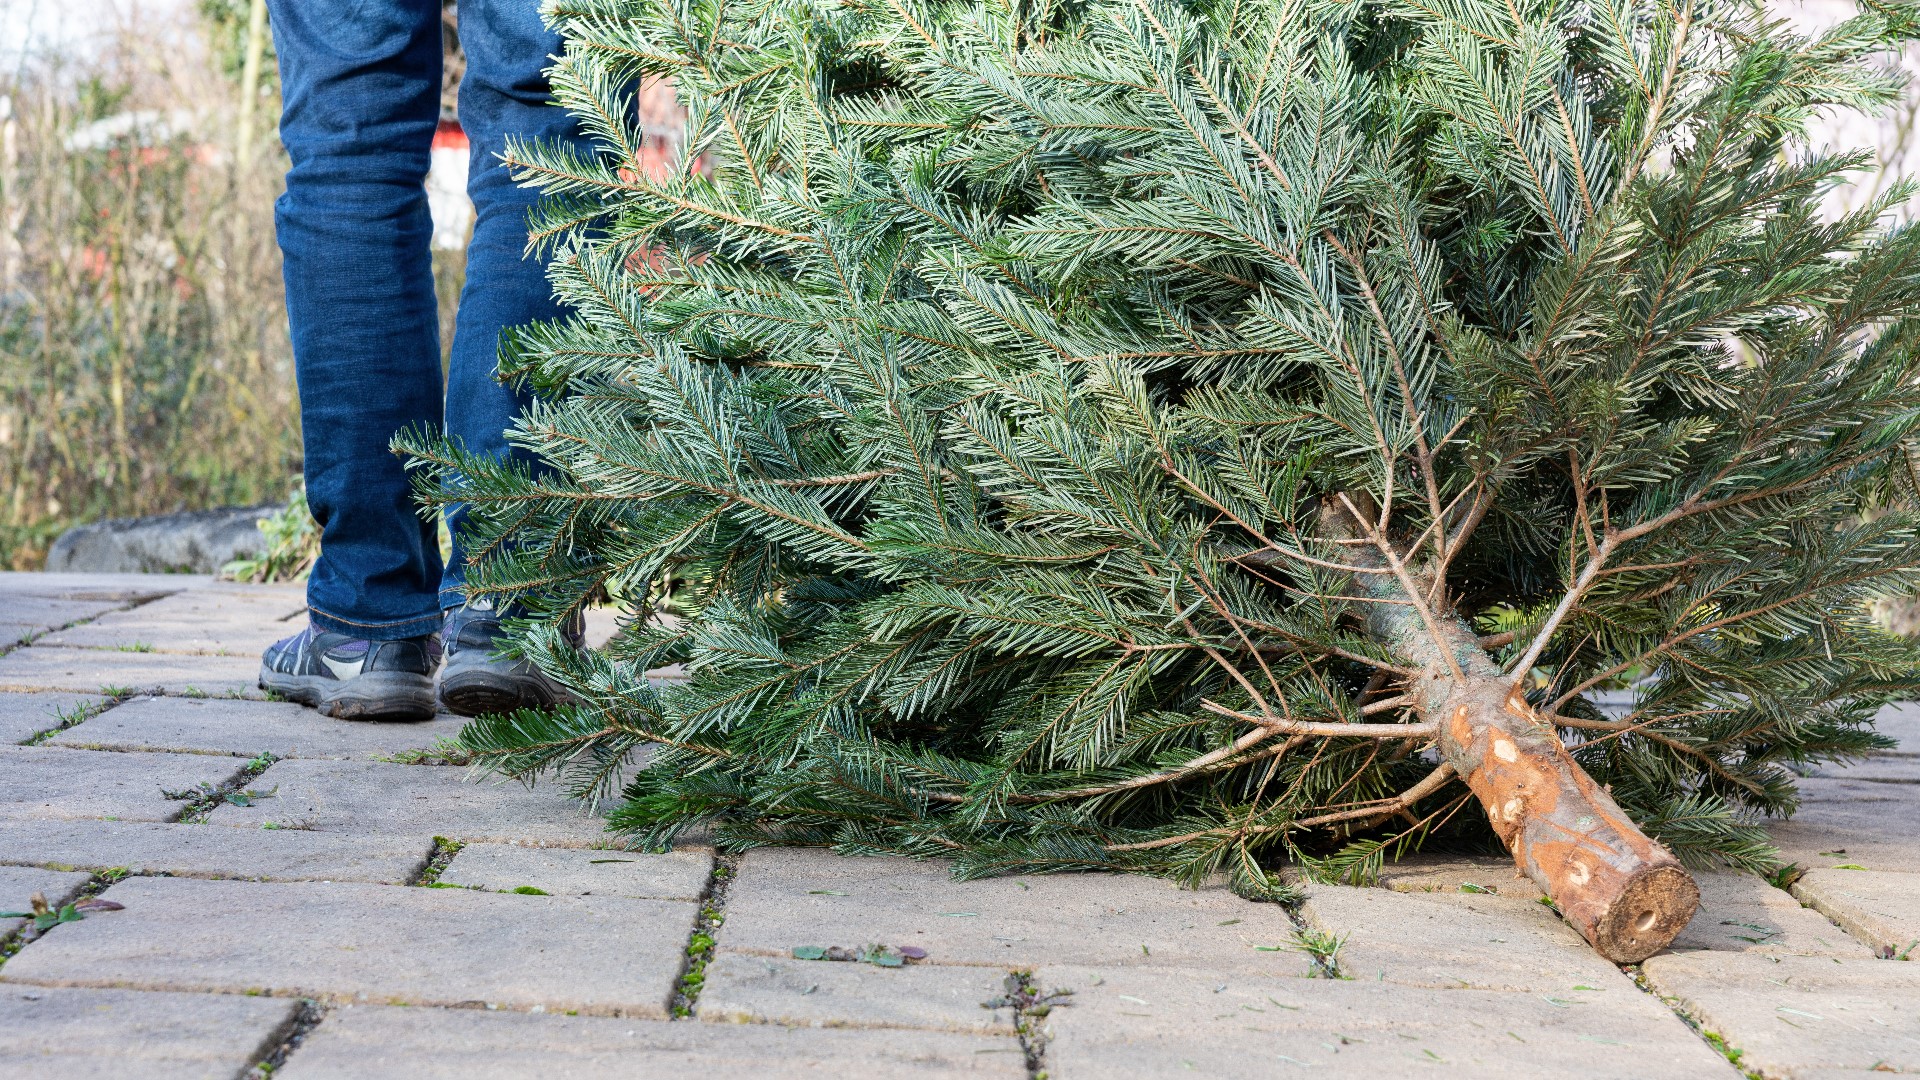 Americans generate a lot of trash every holiday season. The Cuyahoga County Solid Waste District tells us how to recycle your Christmas tree.